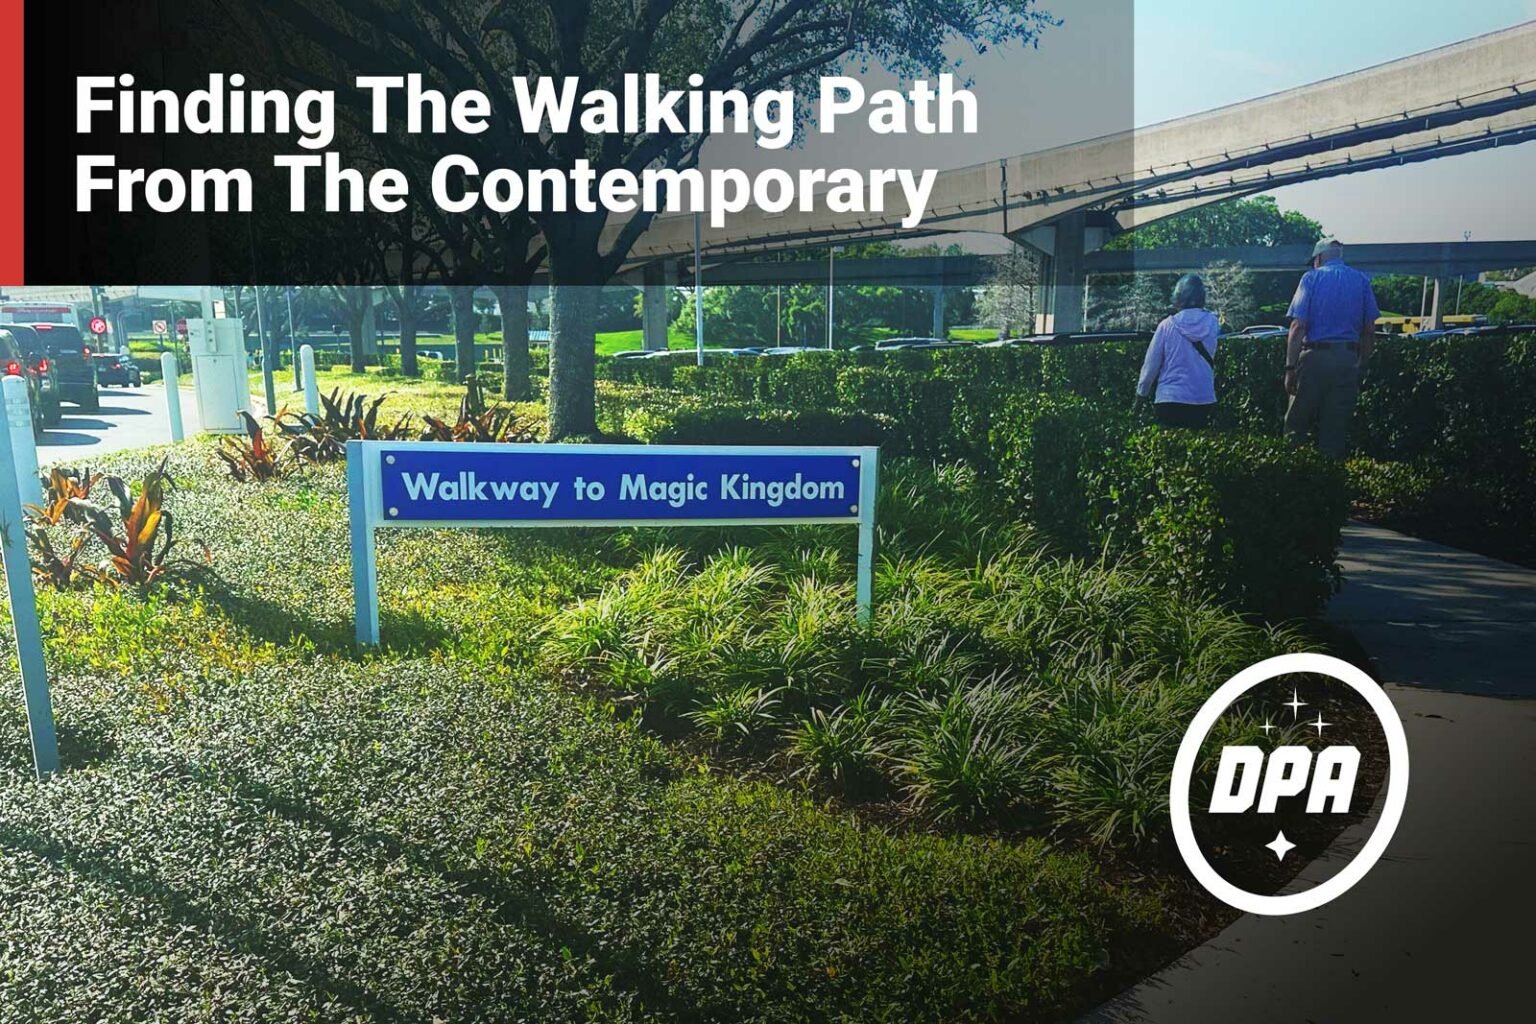 How to find the walking path from the Contemporary